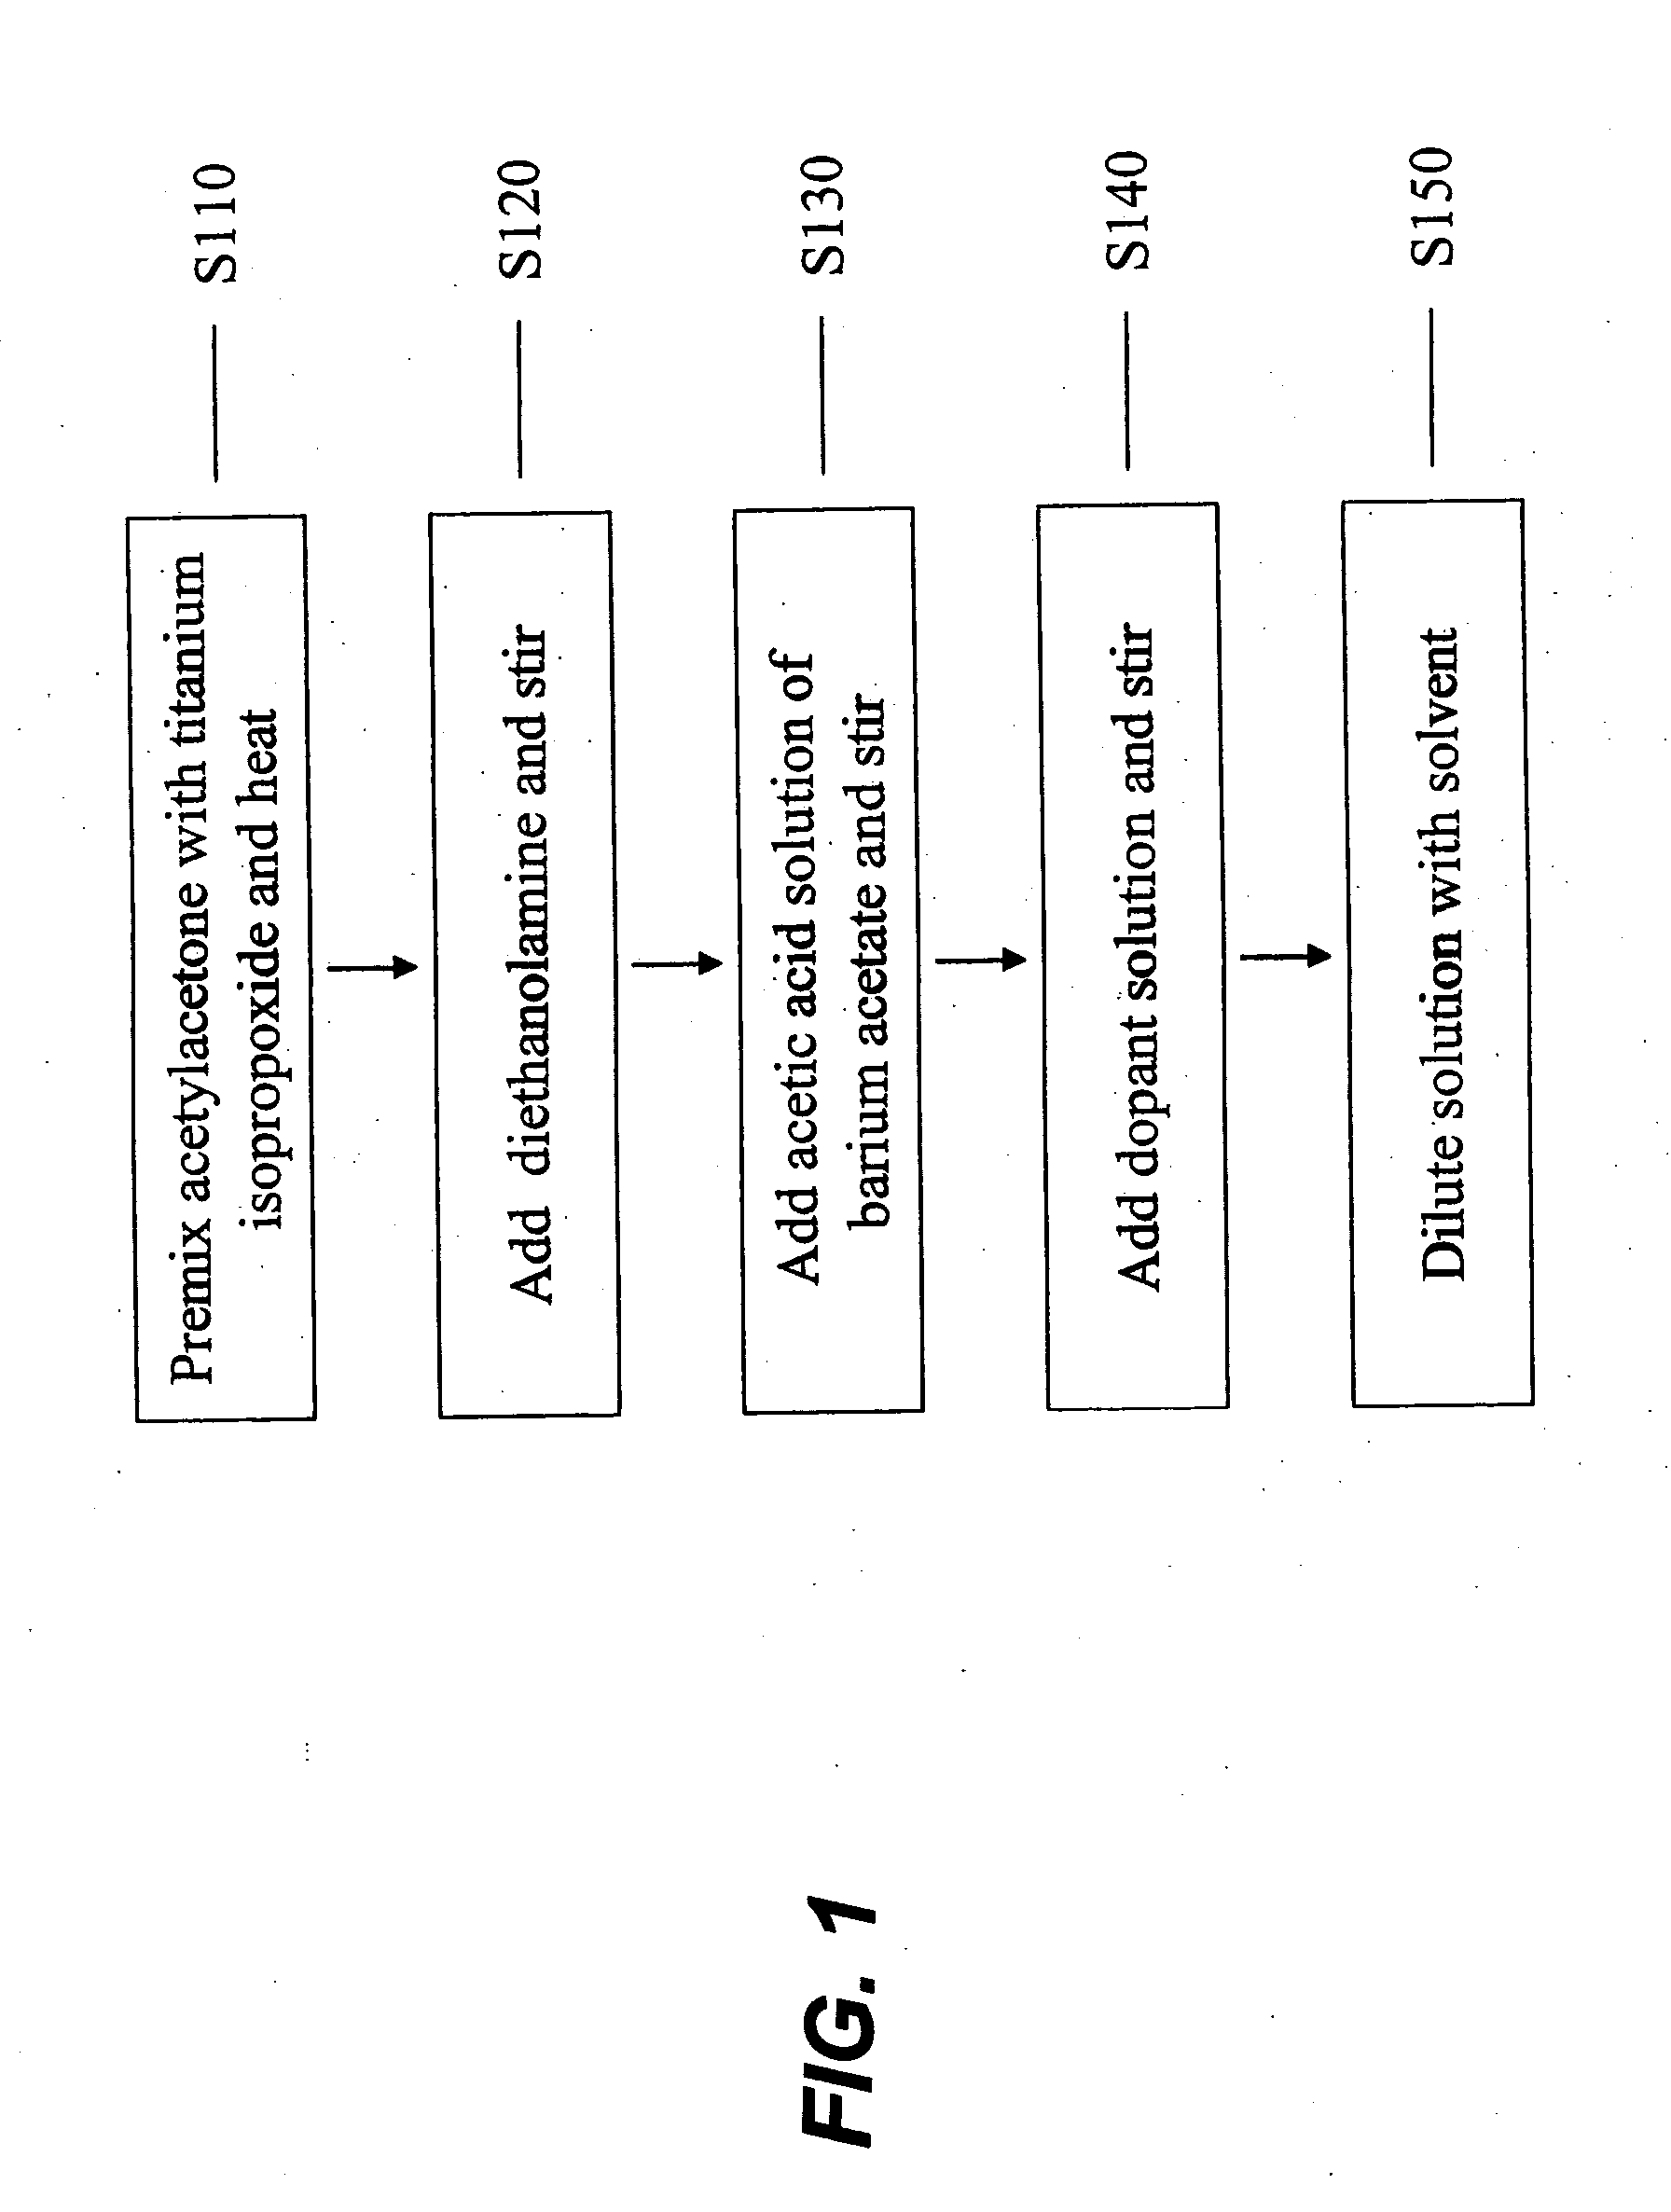 Acceptor doped barium titanate based thin film capacitors on metal foils and methods of making thereof